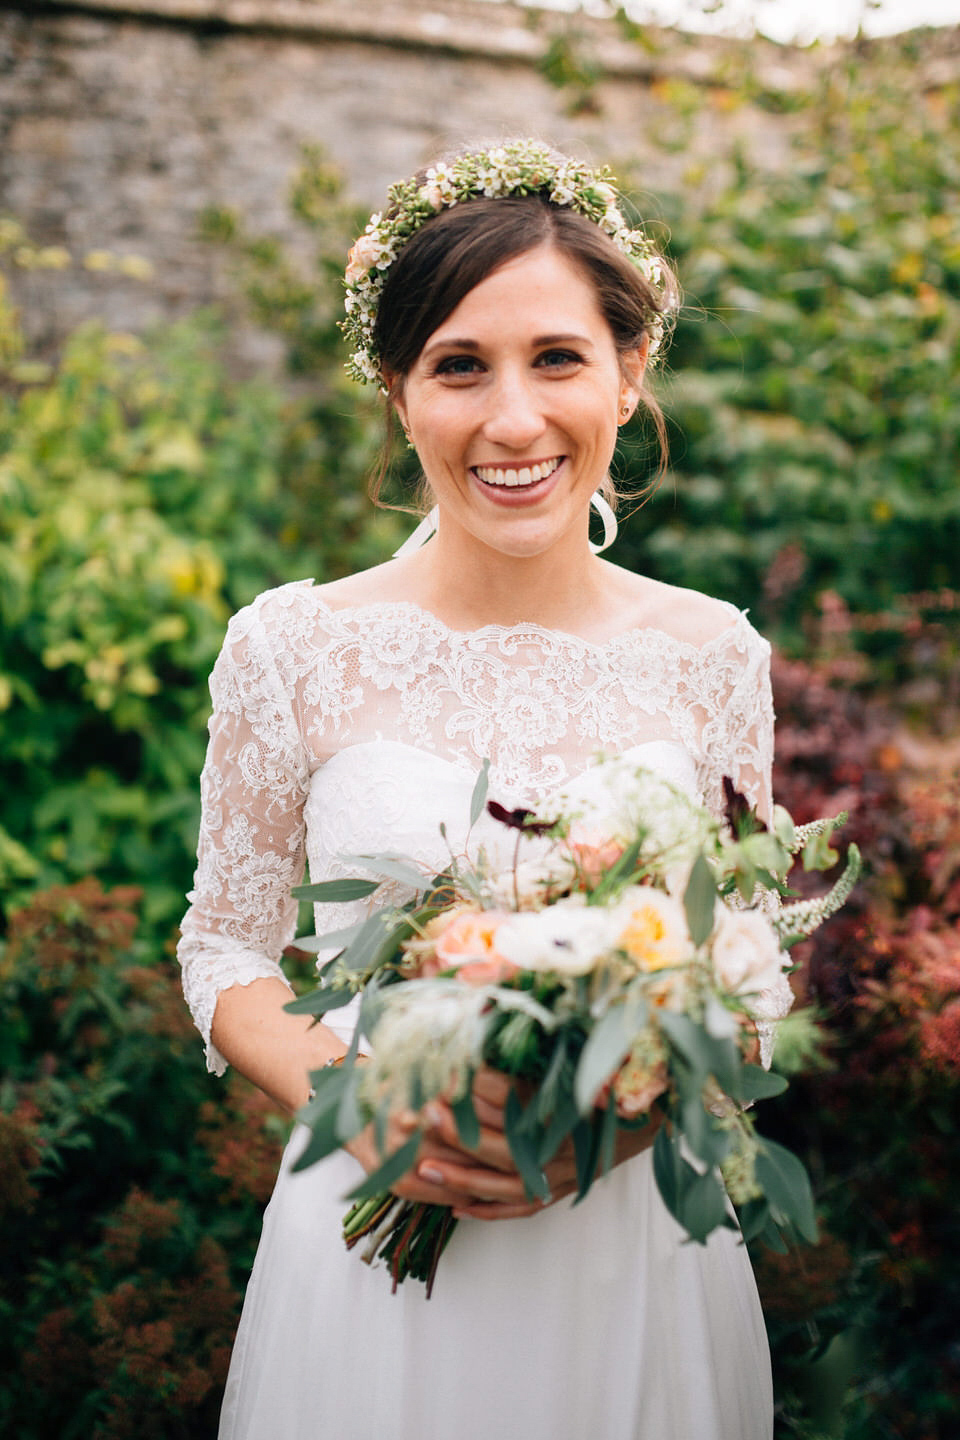 Katie wore a bespoke gown by London based designer Shanna Melville for her romantic Autumn wedding in the Cotswolds. Photography by Joseph Hall.